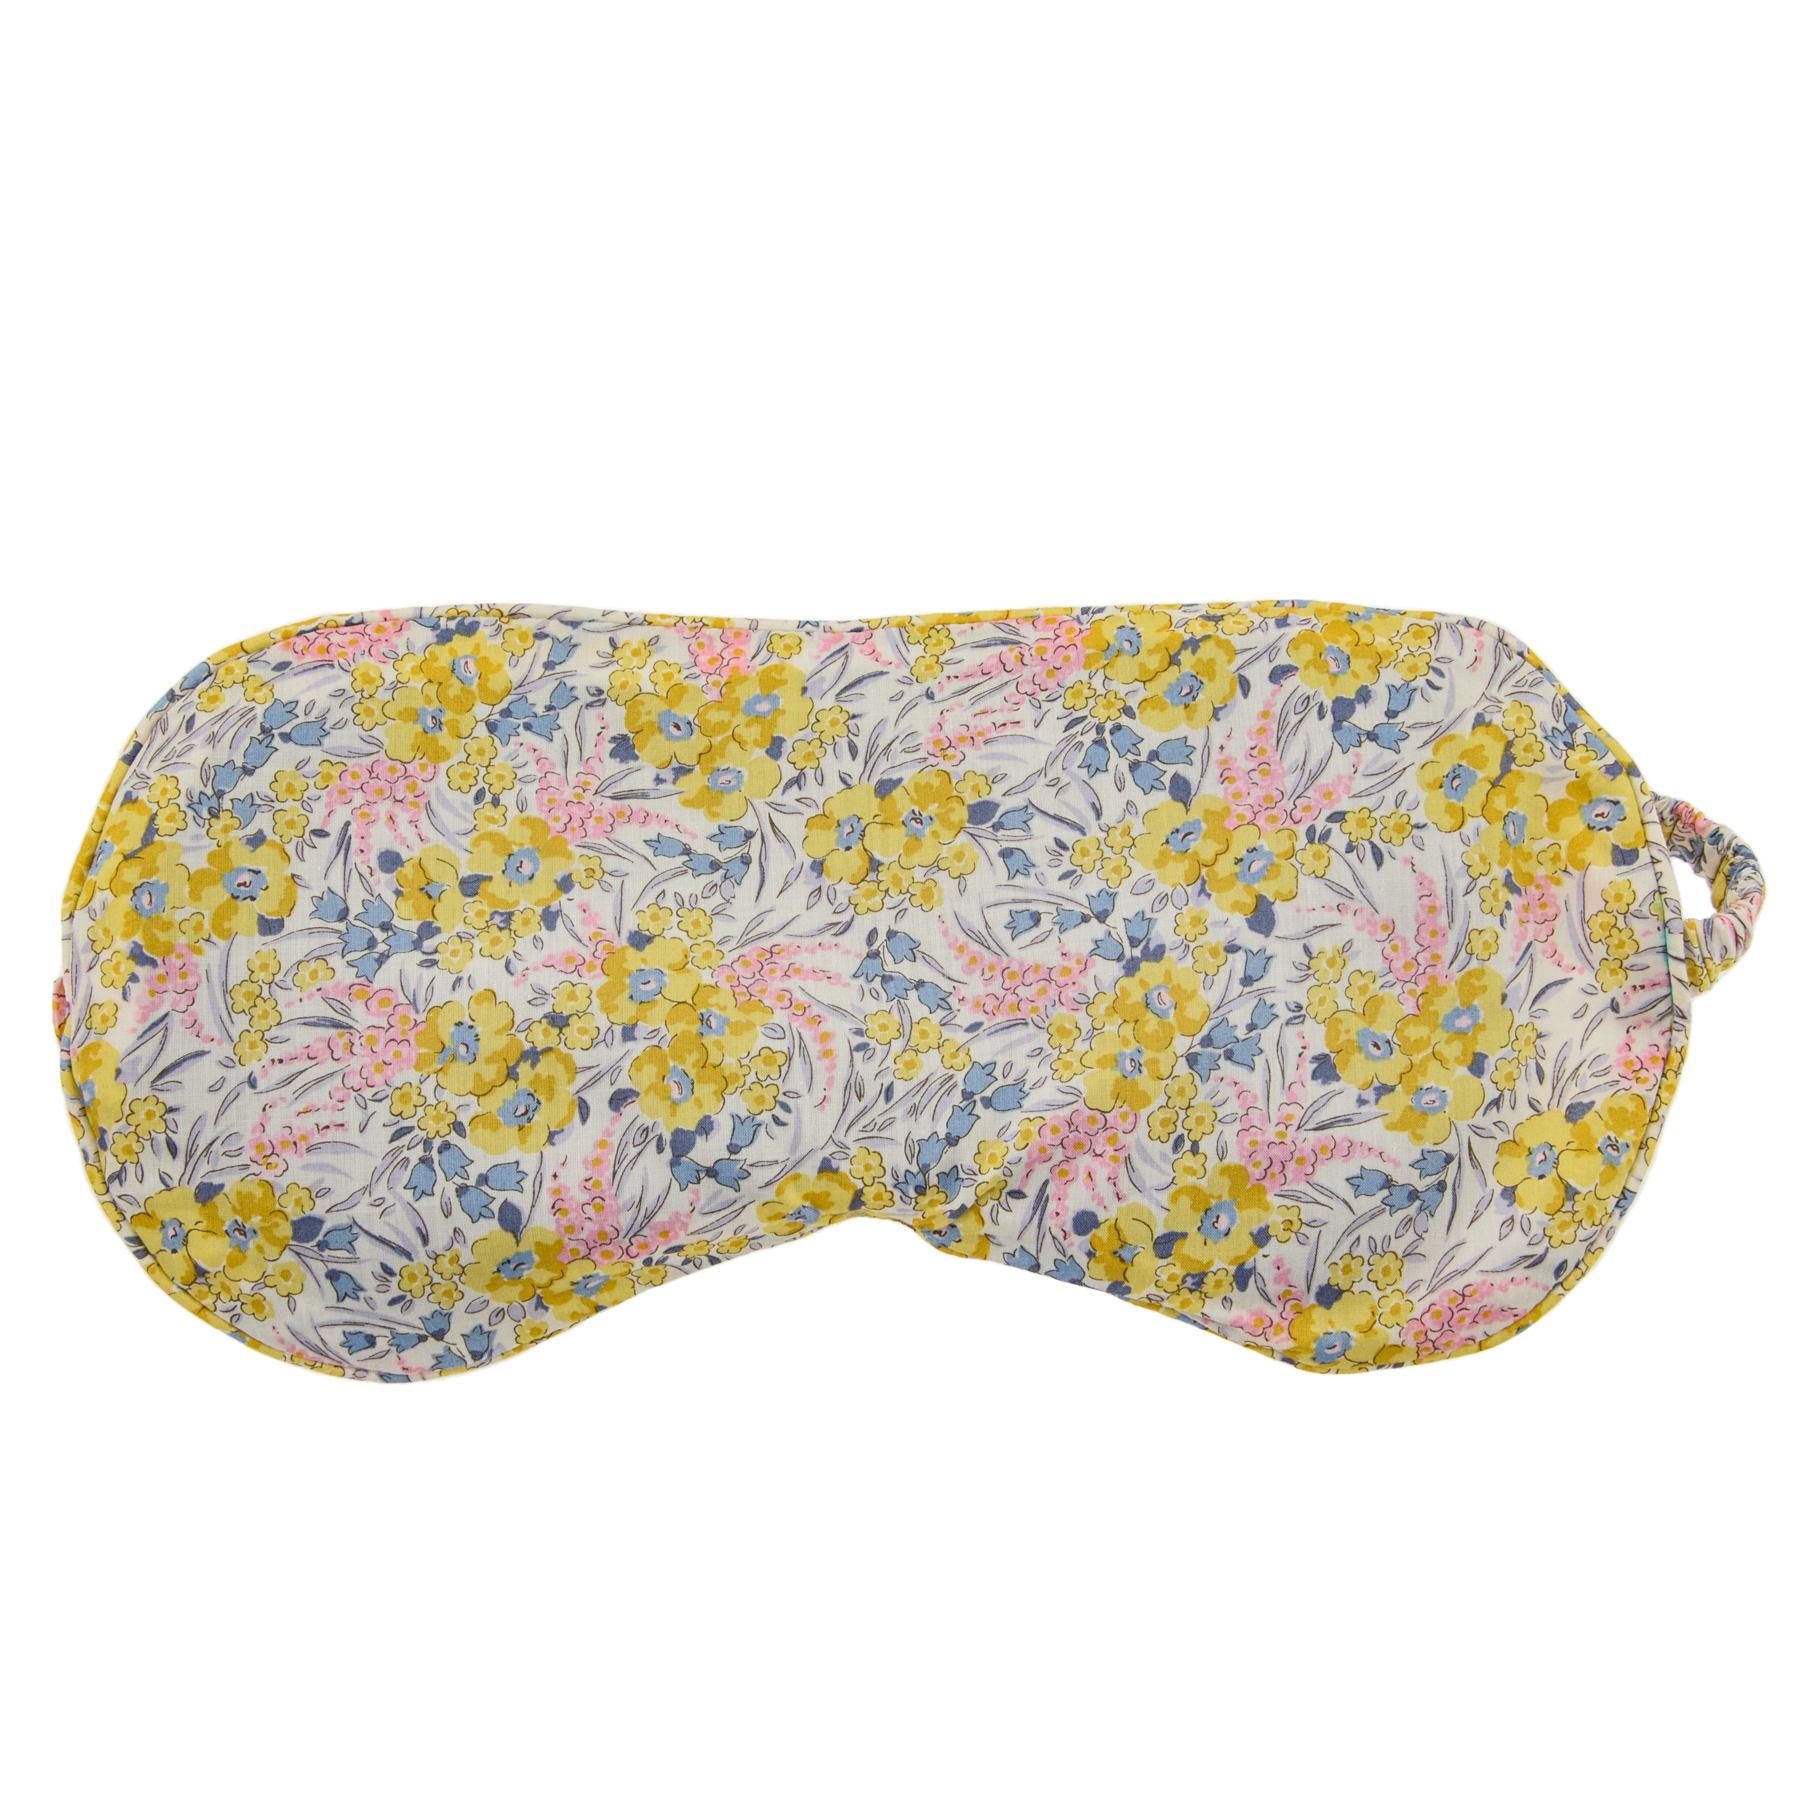 Image of Relaxing Eye masks mw Liberty Swirling Petals from Bon Dep Essentials